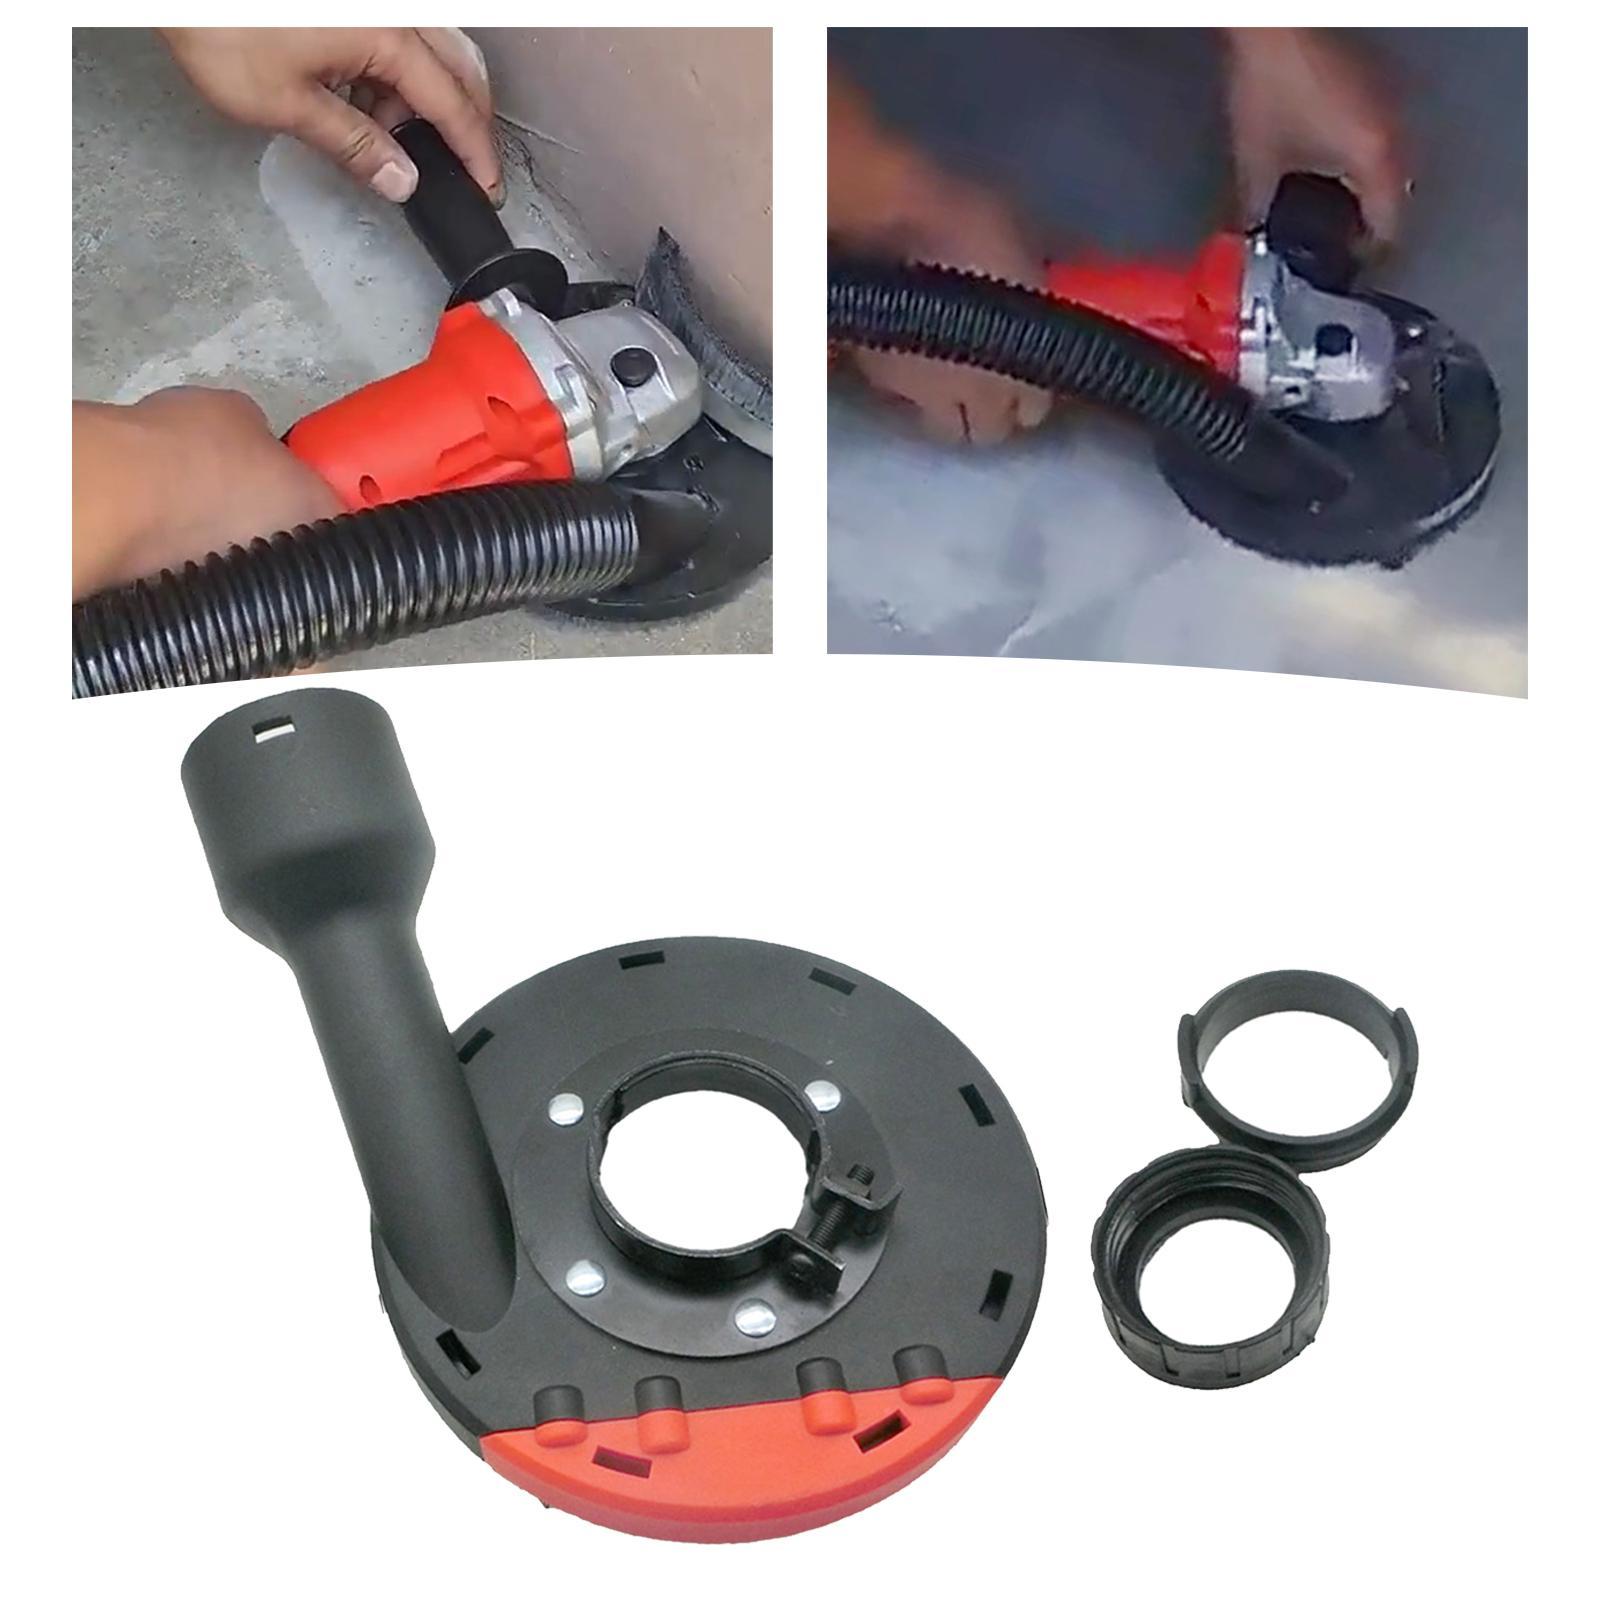 Surface Grinding Dust Shroud for Angle Grinder, Universal 5.5Inch/140mm